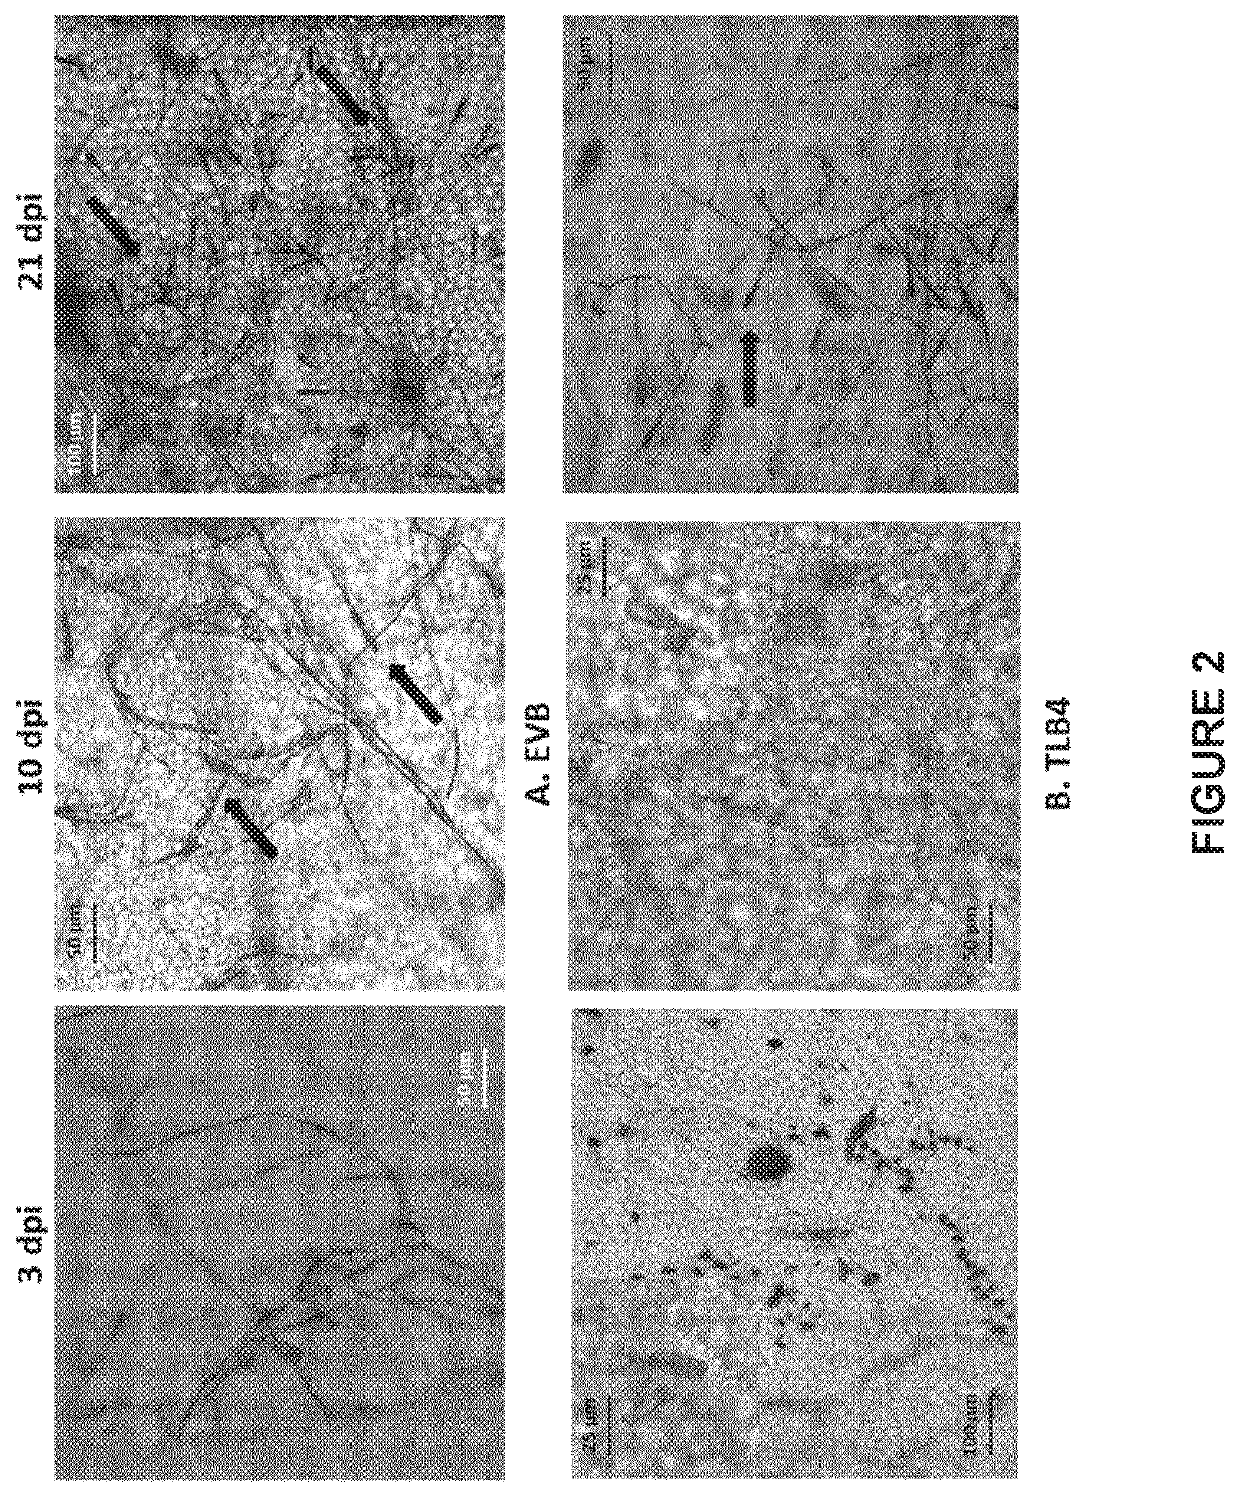 <i>Vitis vinifera </i>with reduced MLO expression and increased resistance to powdery mildew